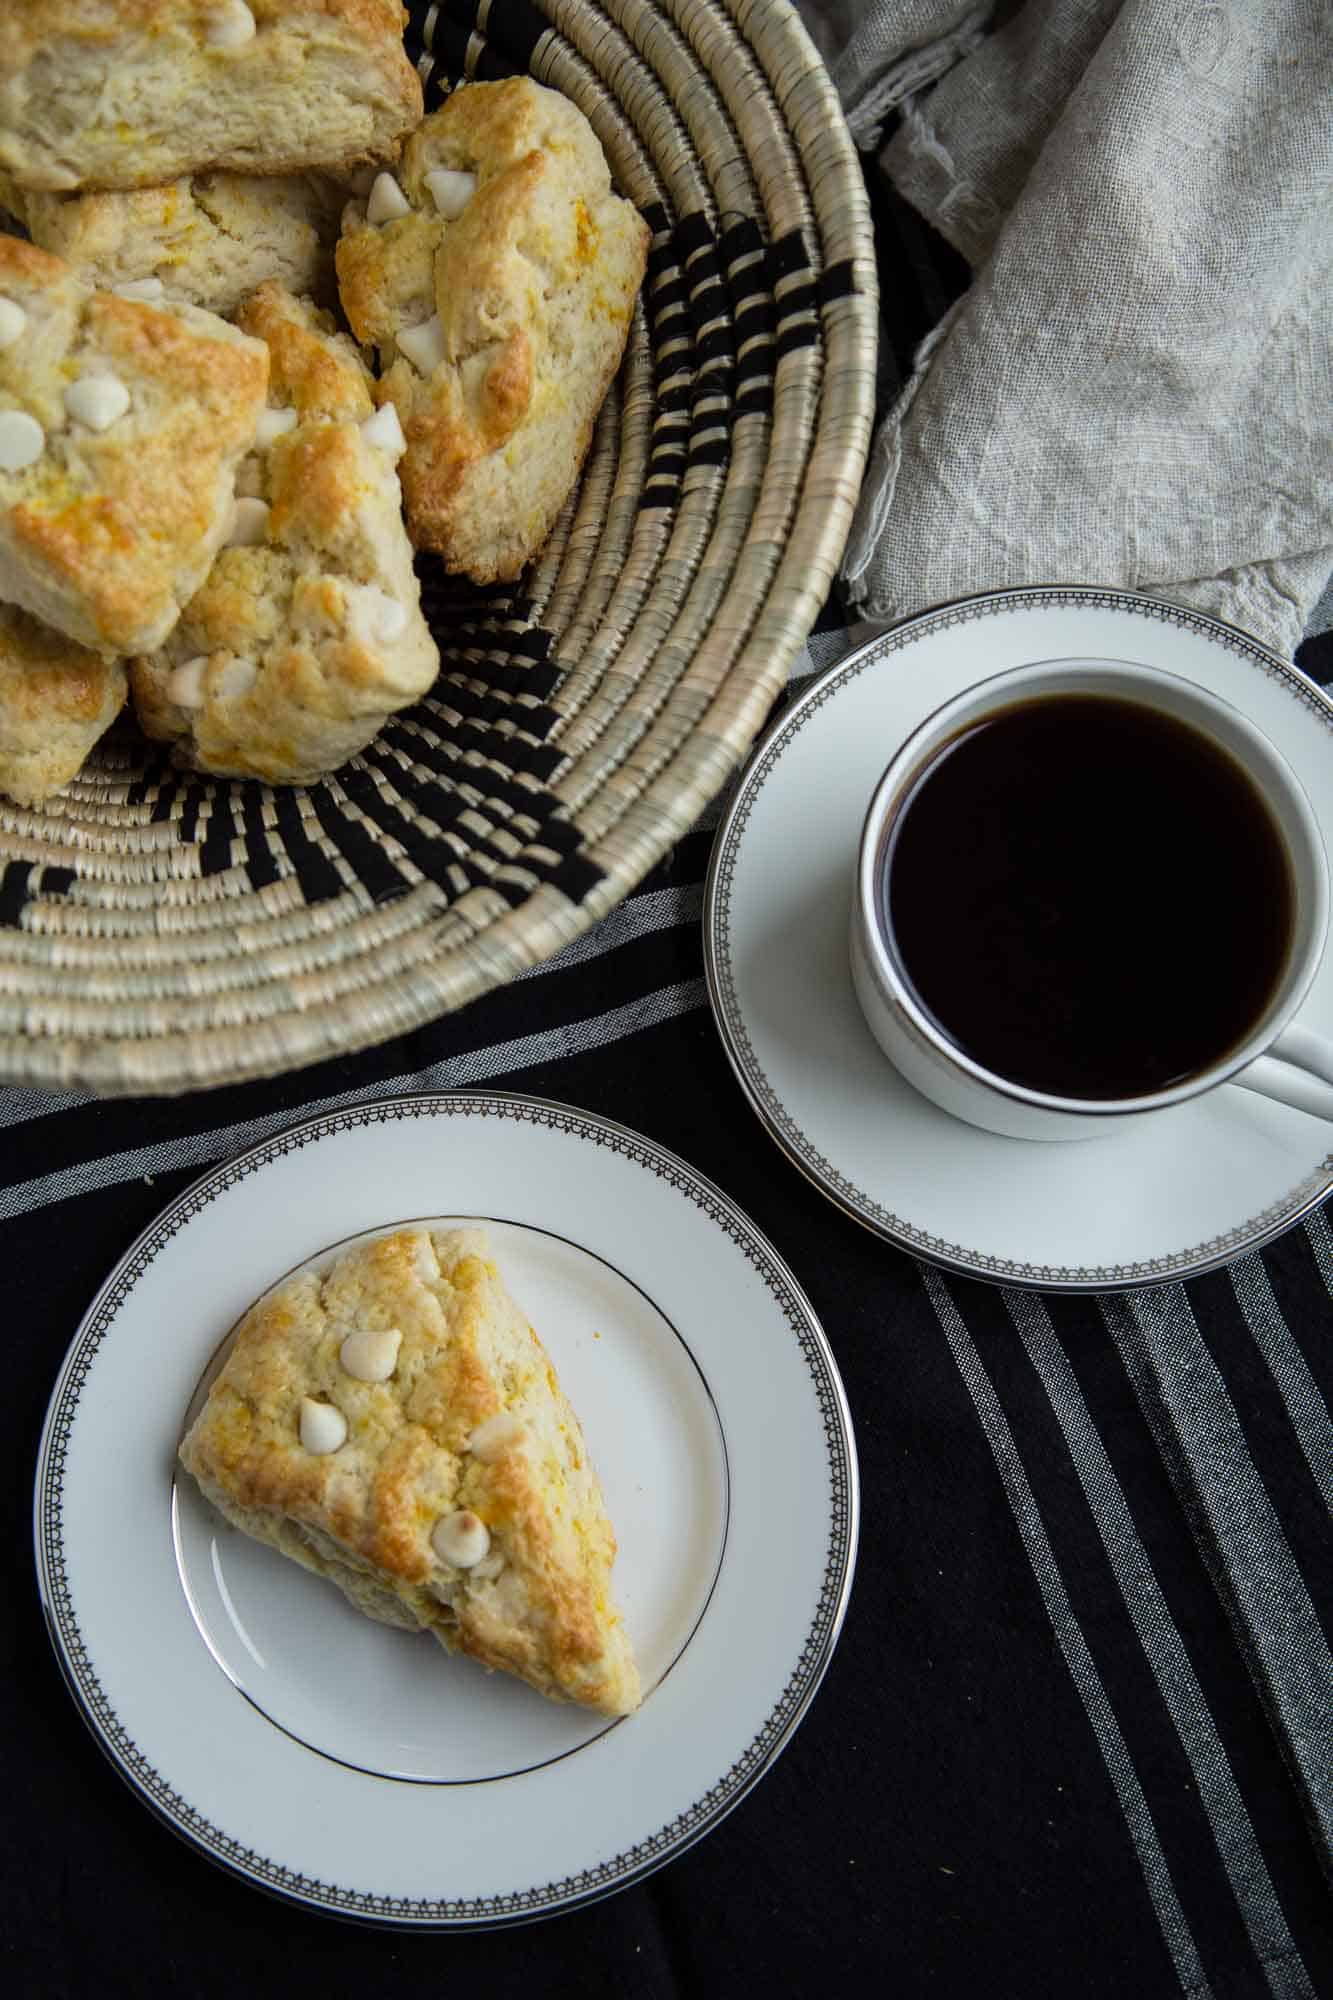 single scone on a plate next to a basket of scones and a teacup of coffee.